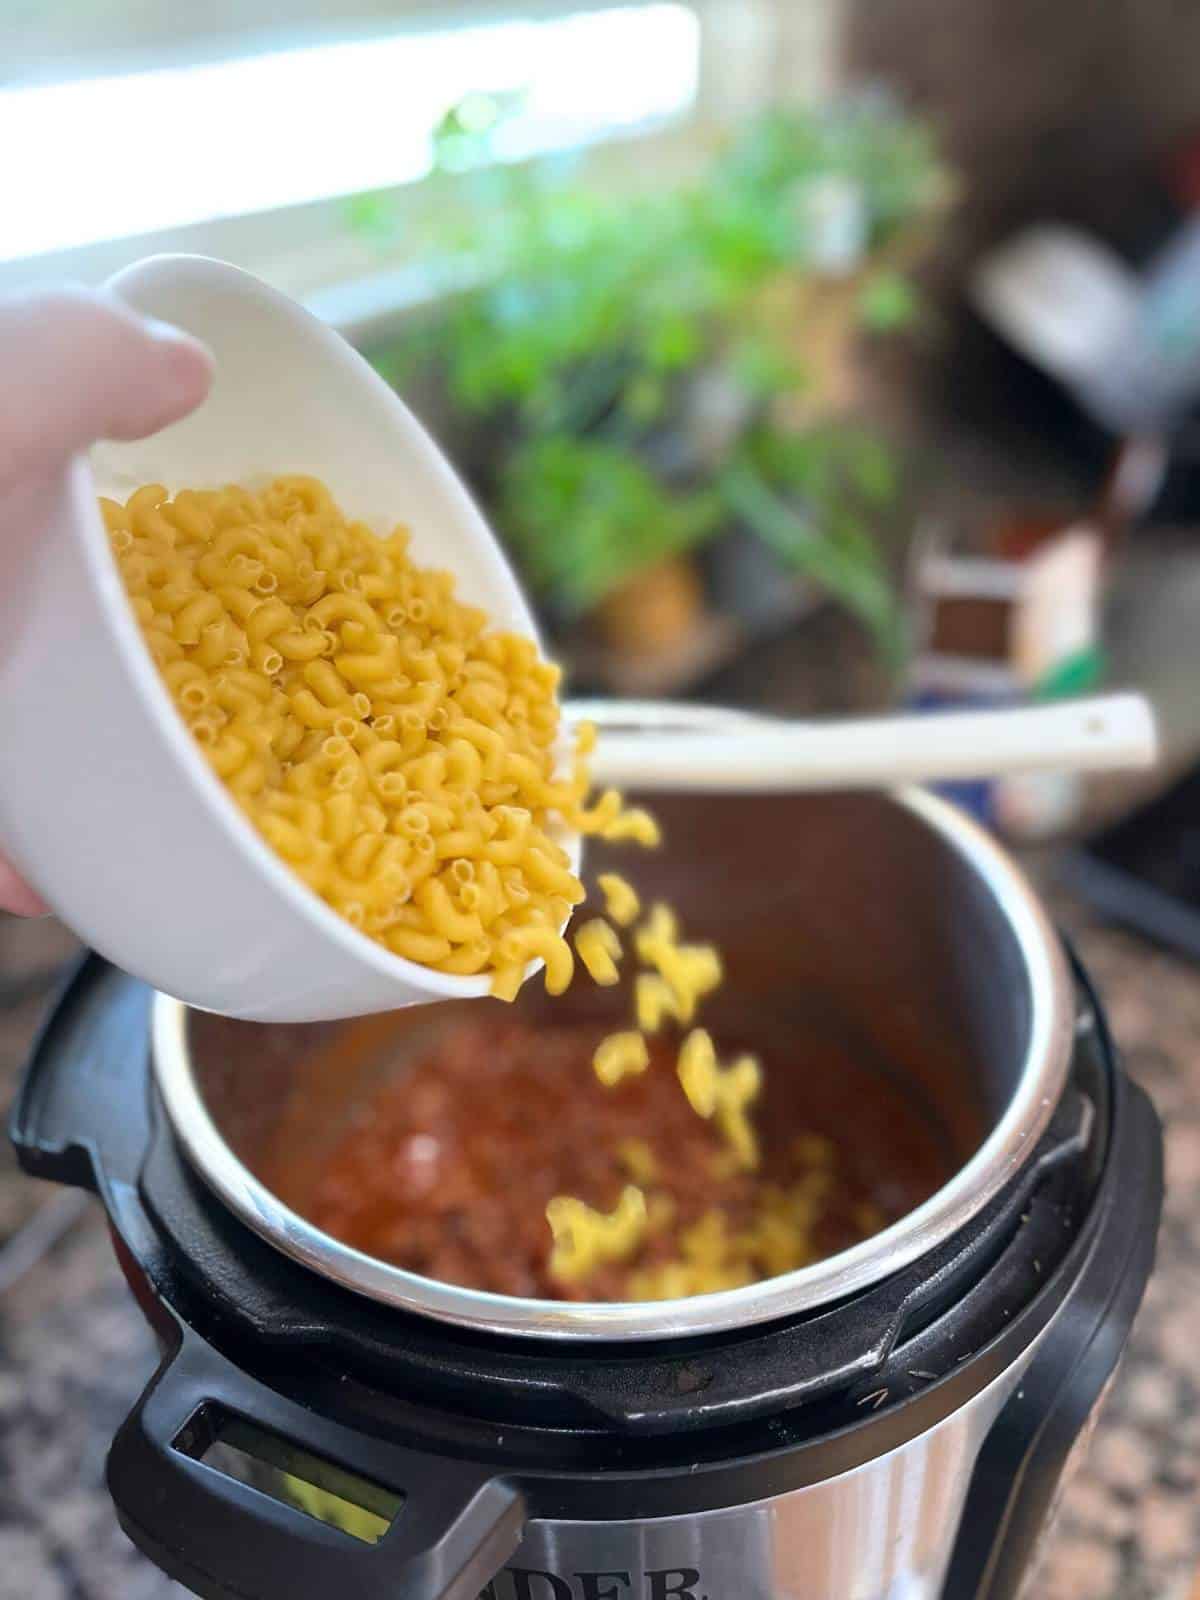 Pasta pouring from a white bowl into the instant pot.